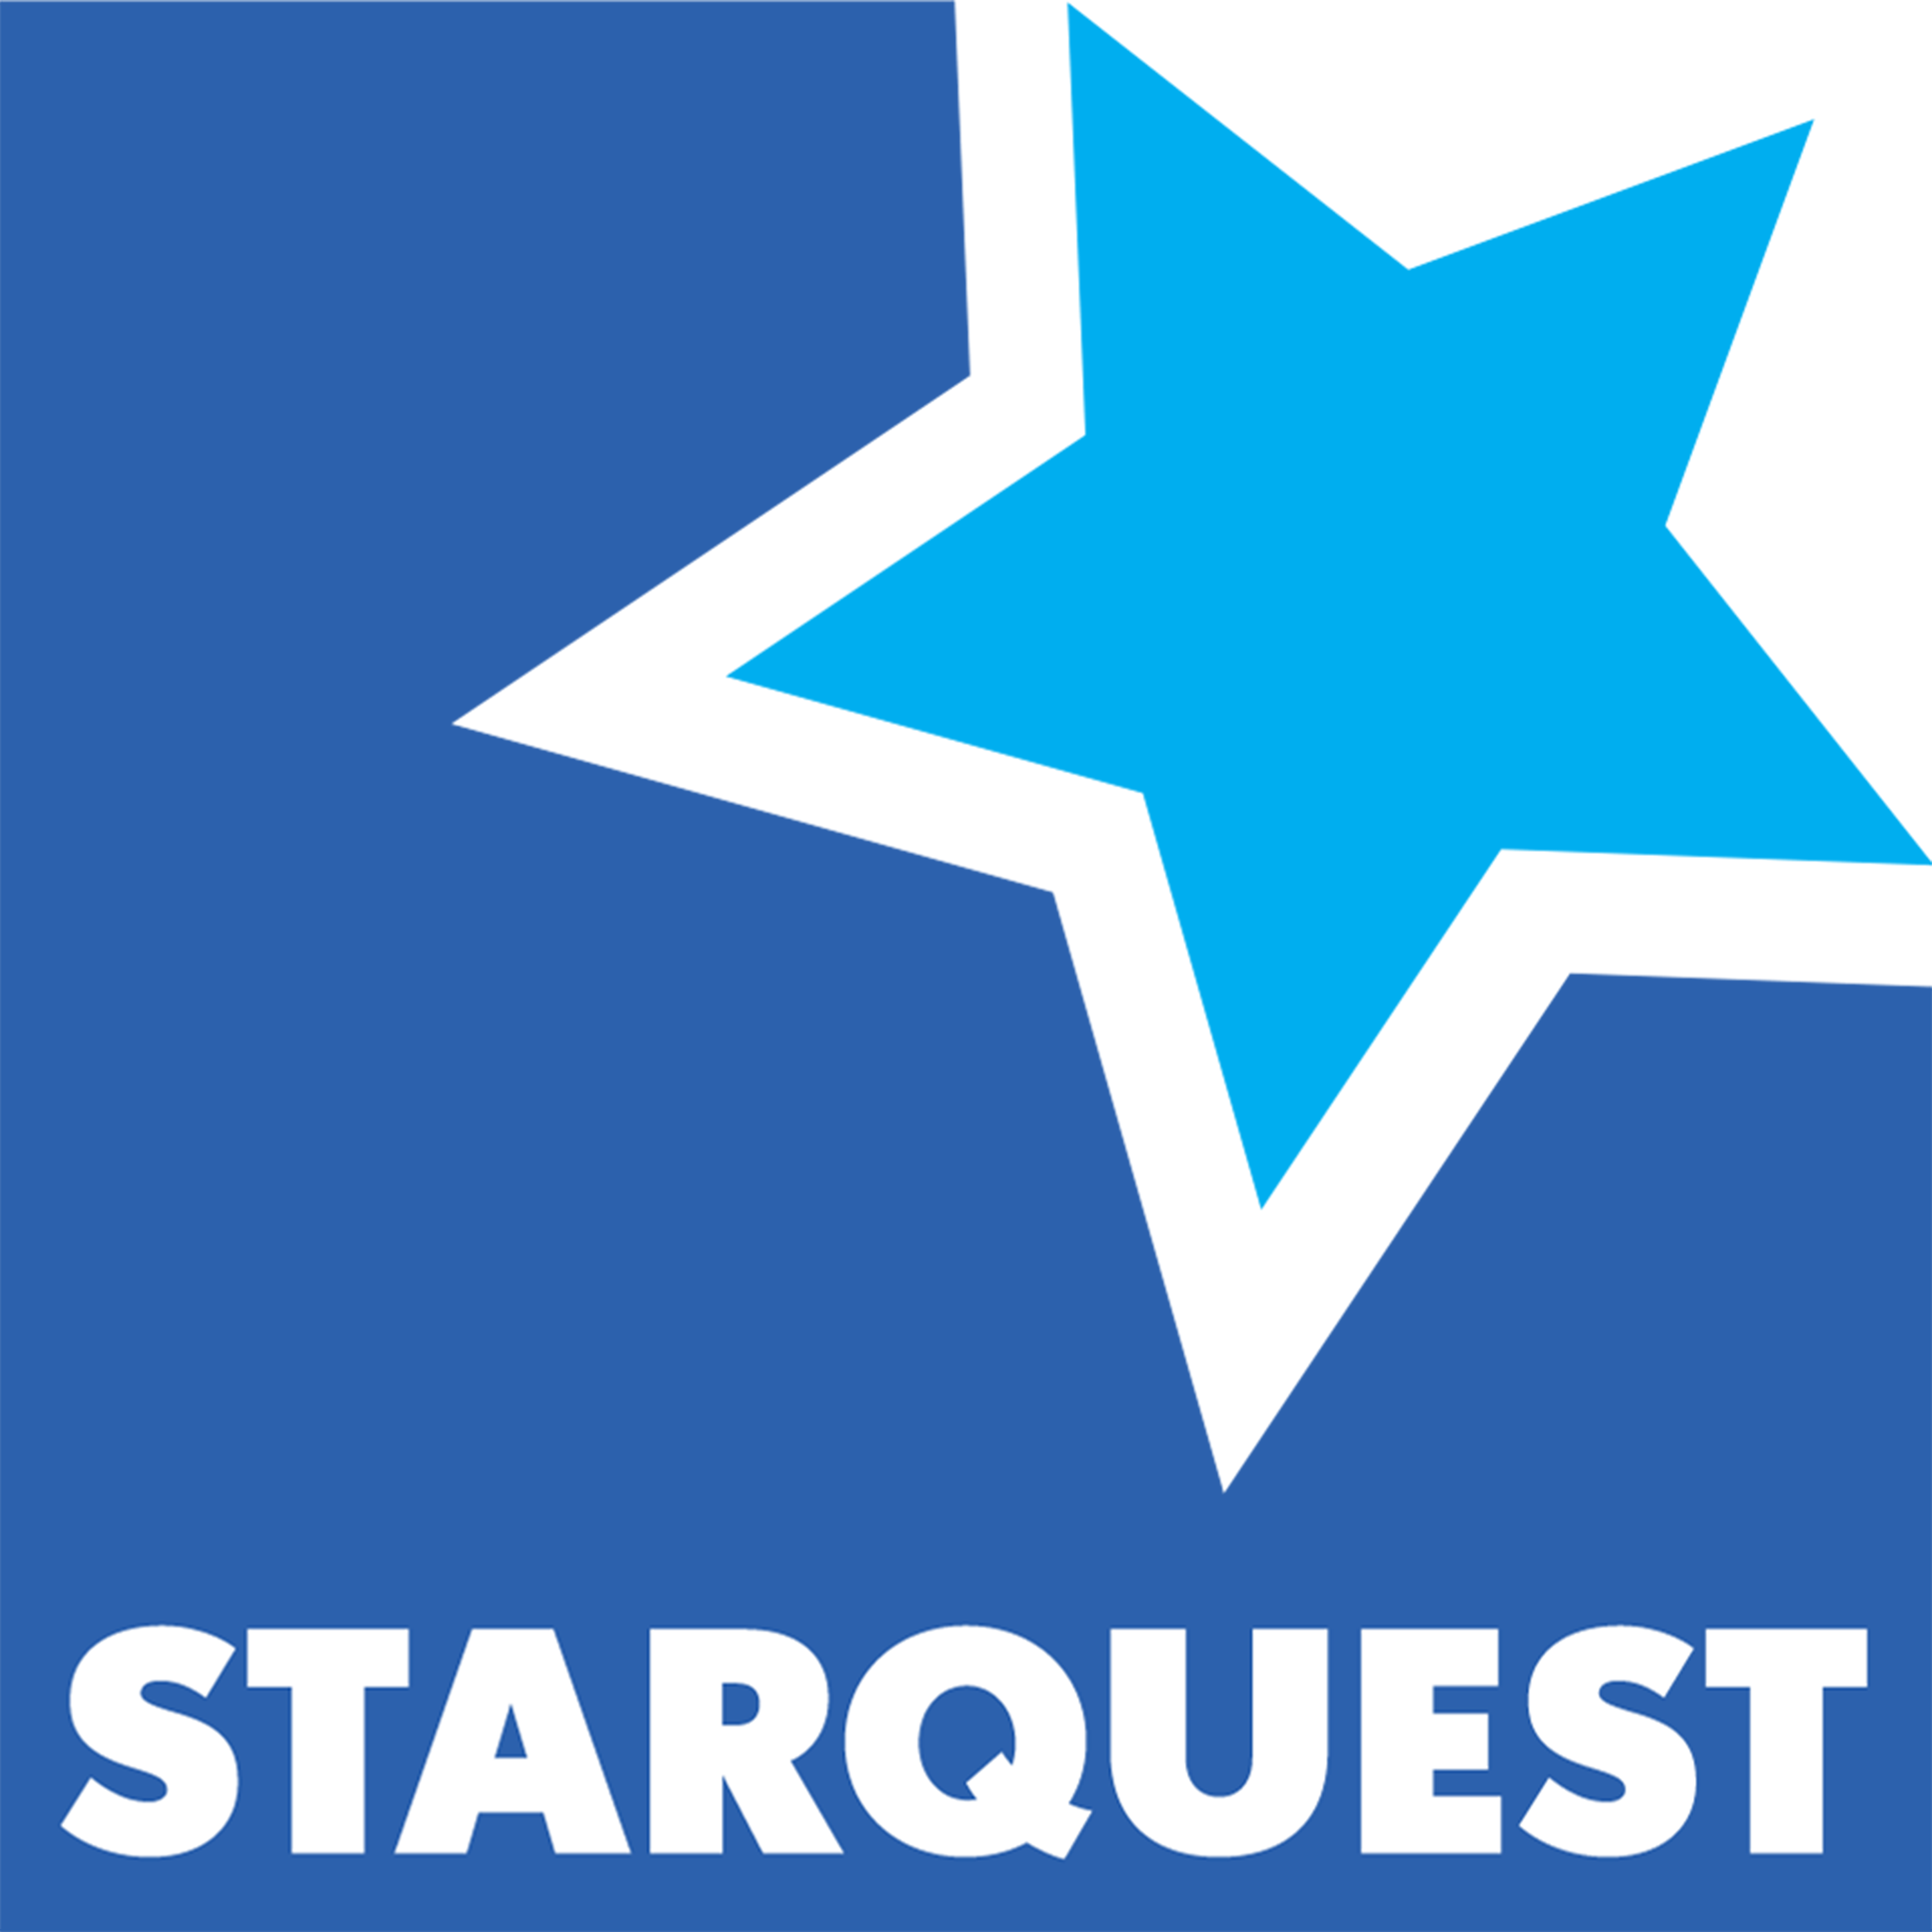 A Special Message from StarQuest